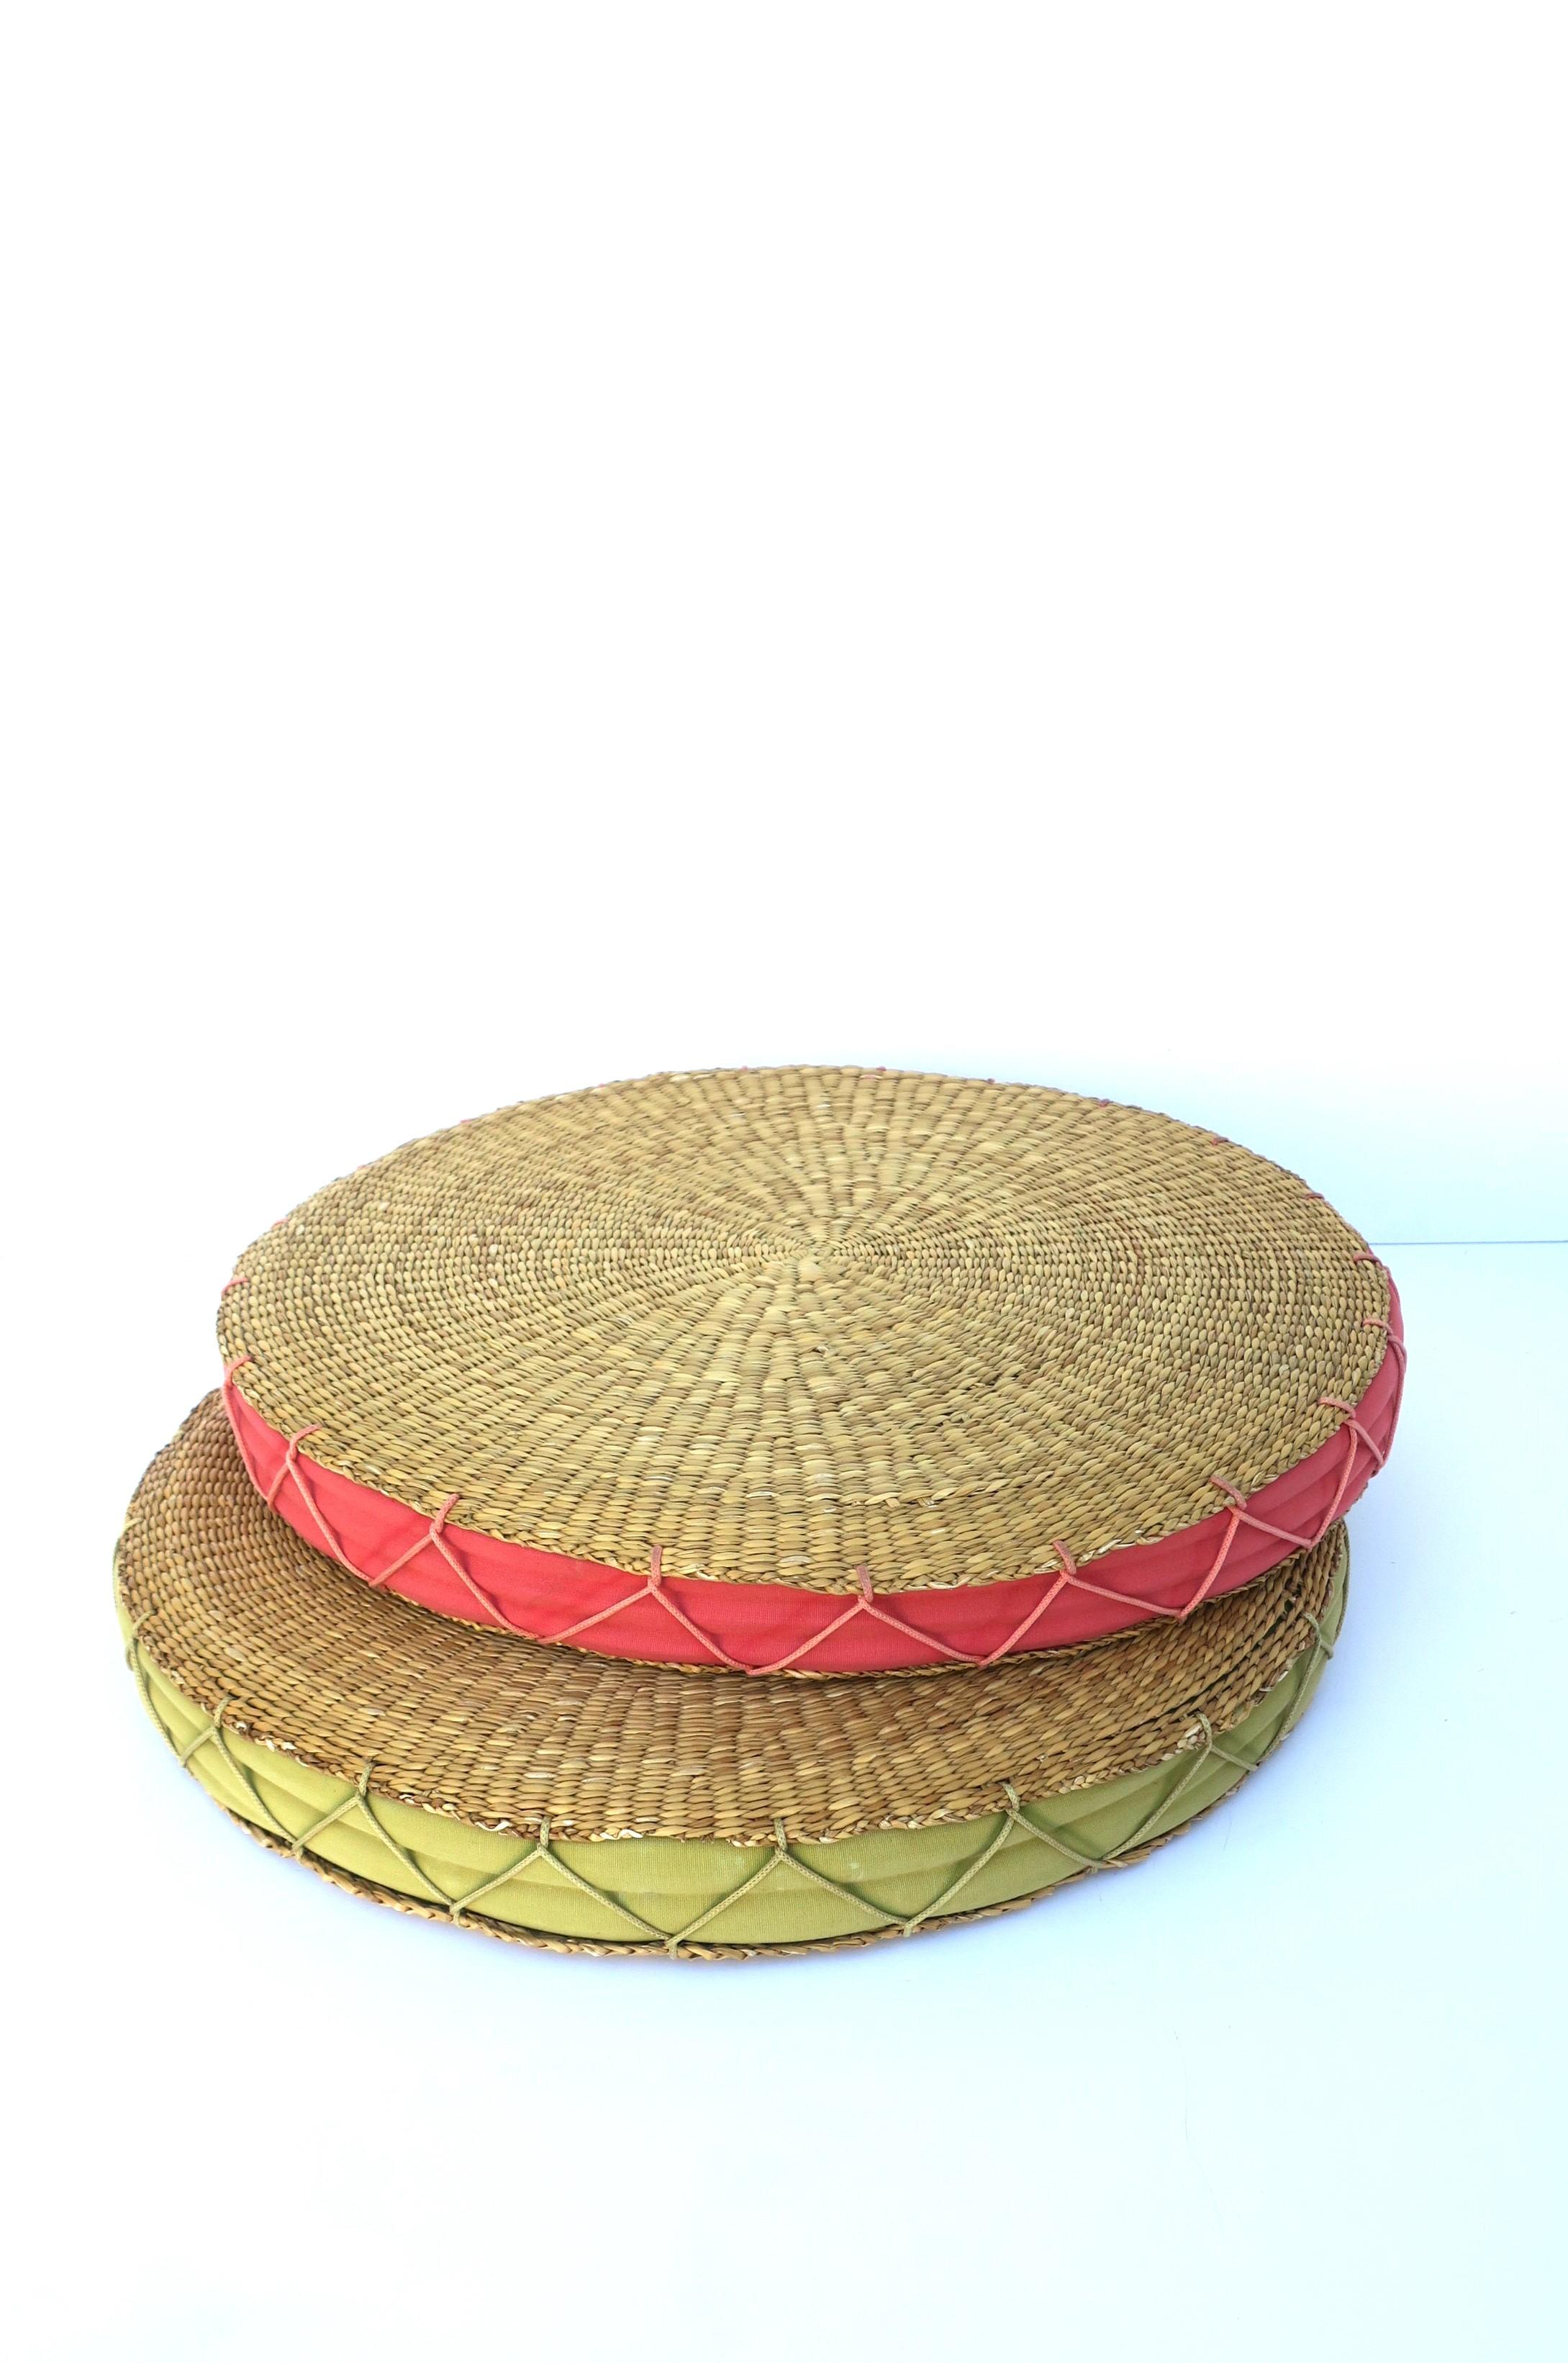 Wicker Seat or Floor Cushion, Watermelon Pink and Tan For Sale 1